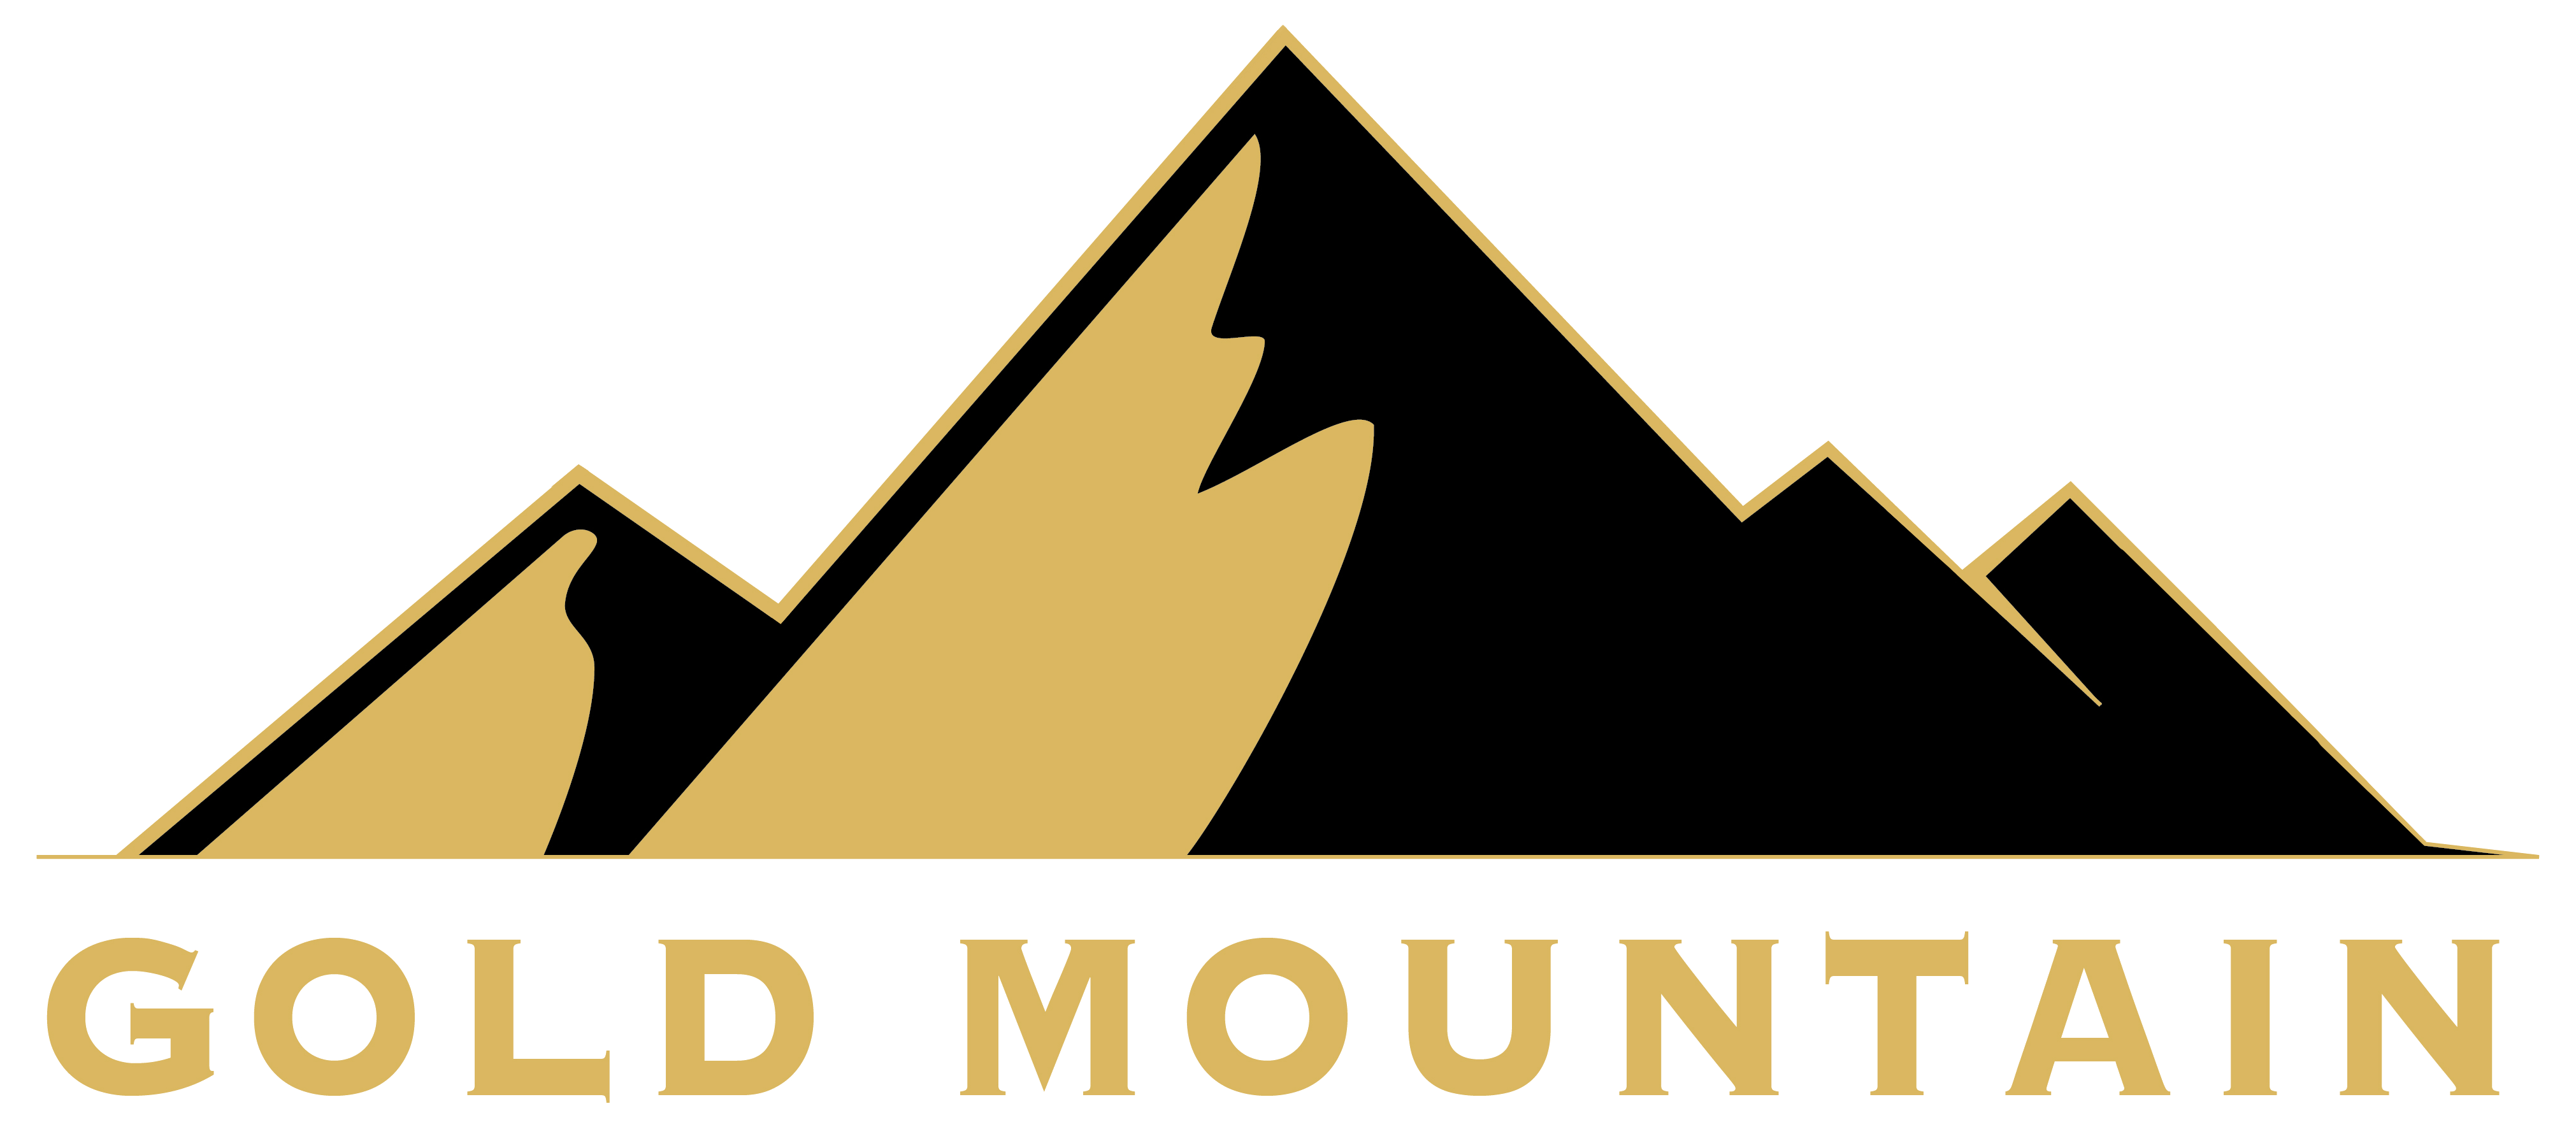 Gold Mountain Mining Corp, Monday, March 22, 2021, Press release picture